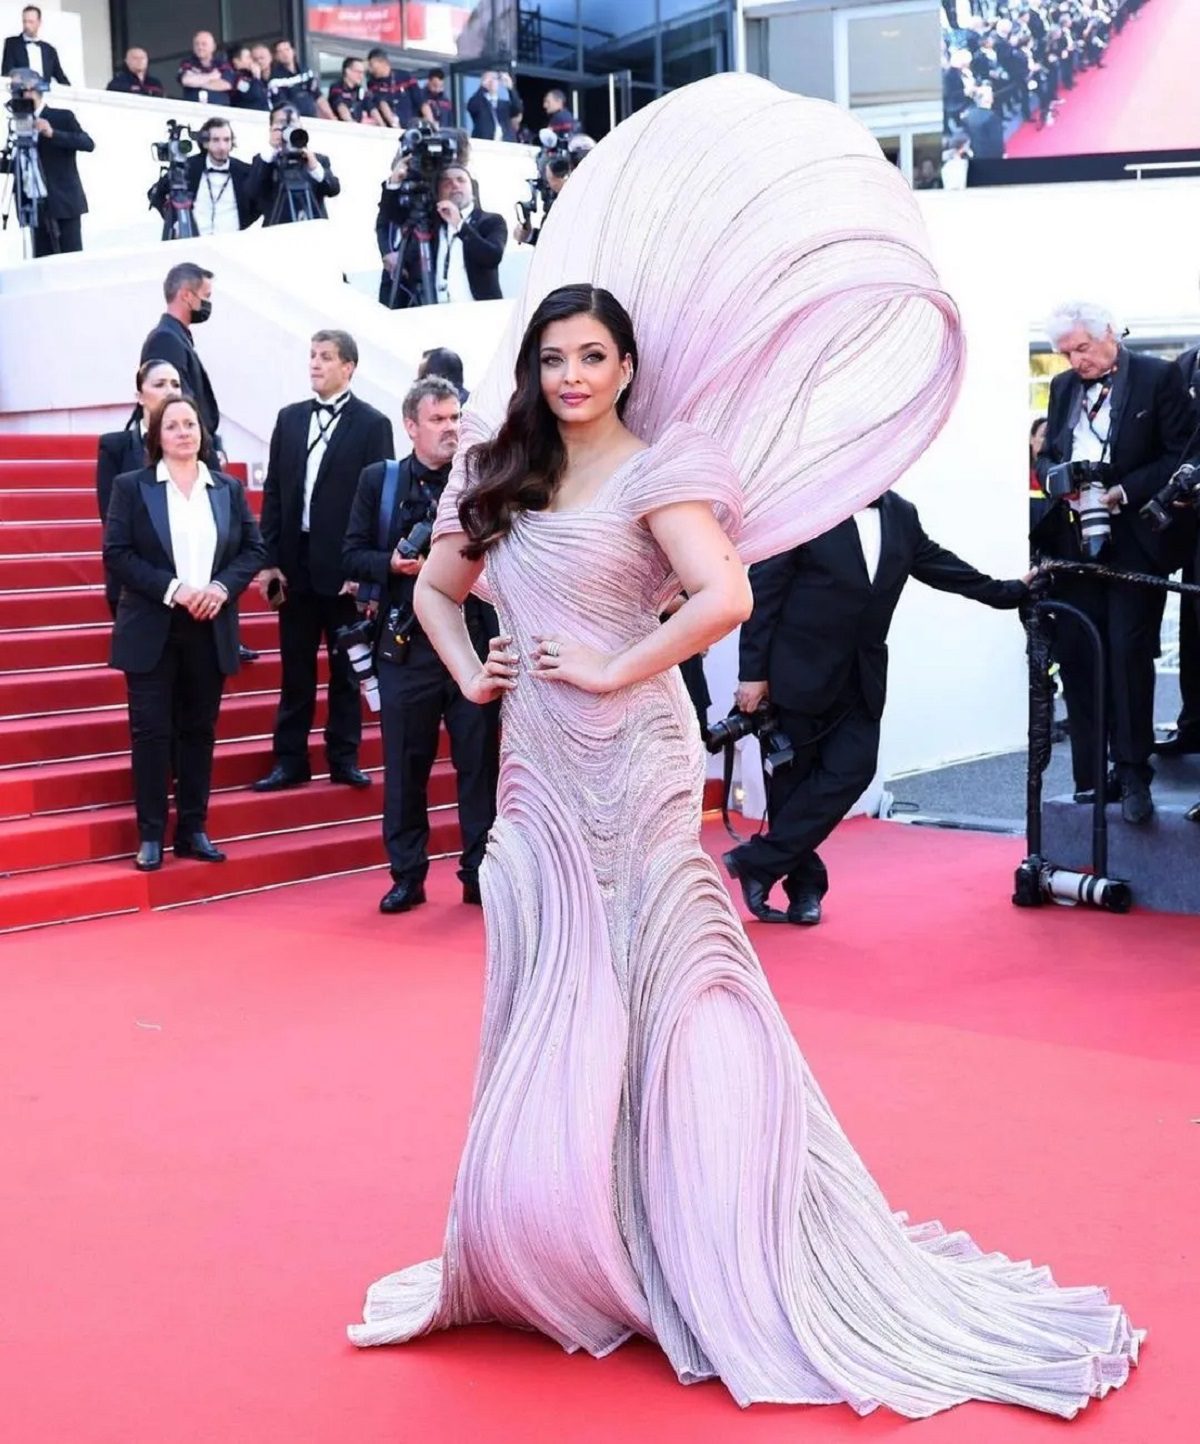 Aishwarya Rai Bachchan's 'Cannes 2022' Look Gets All The Attention: Pics